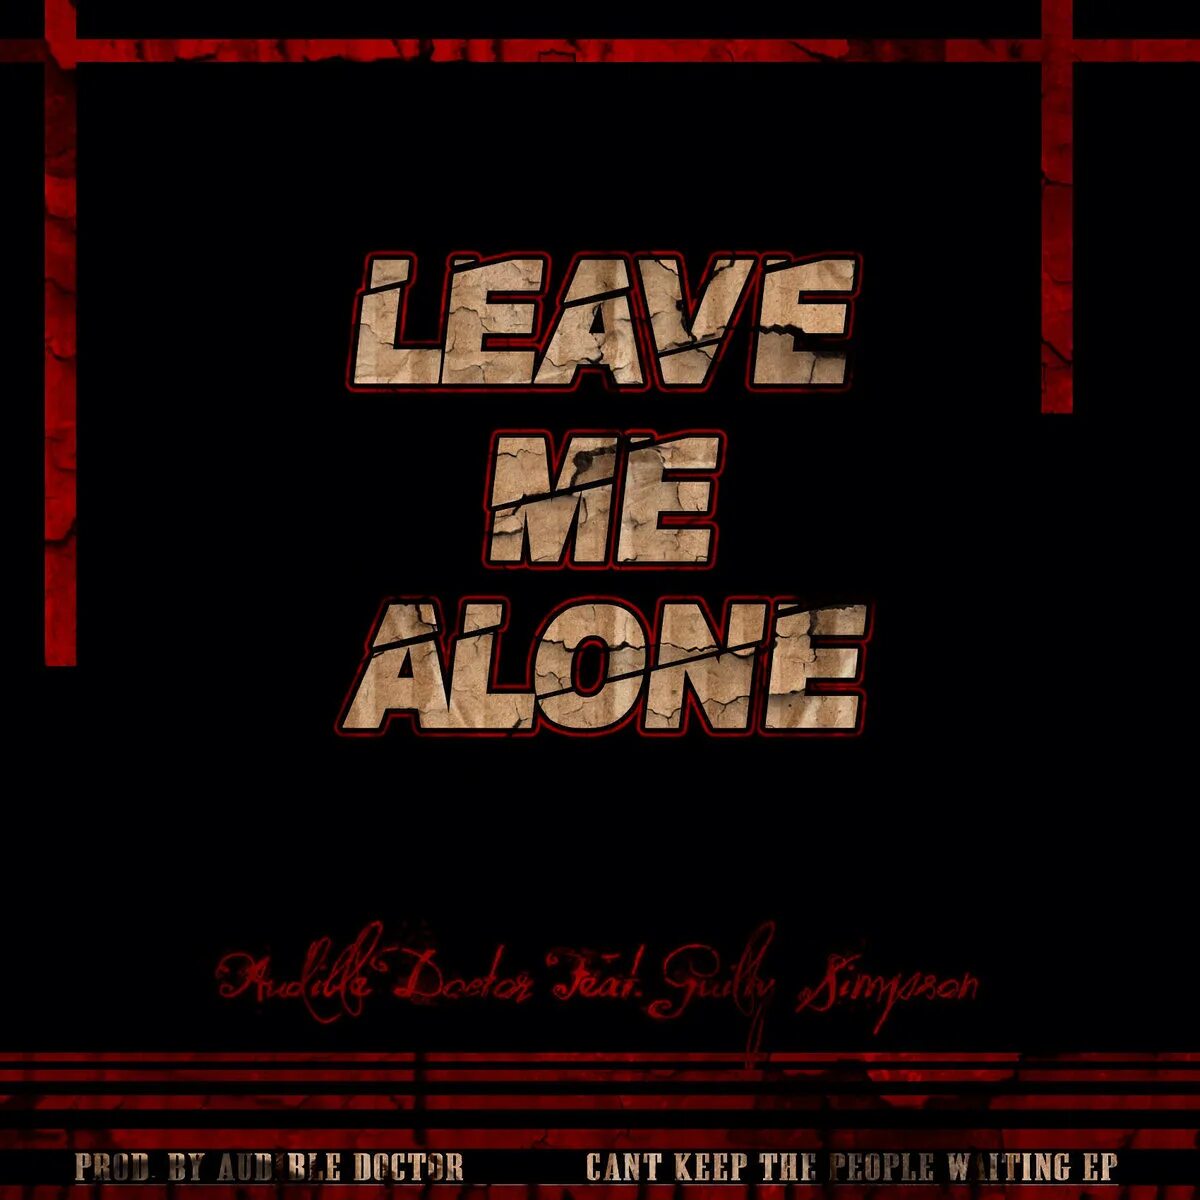 Leave me alone mixed